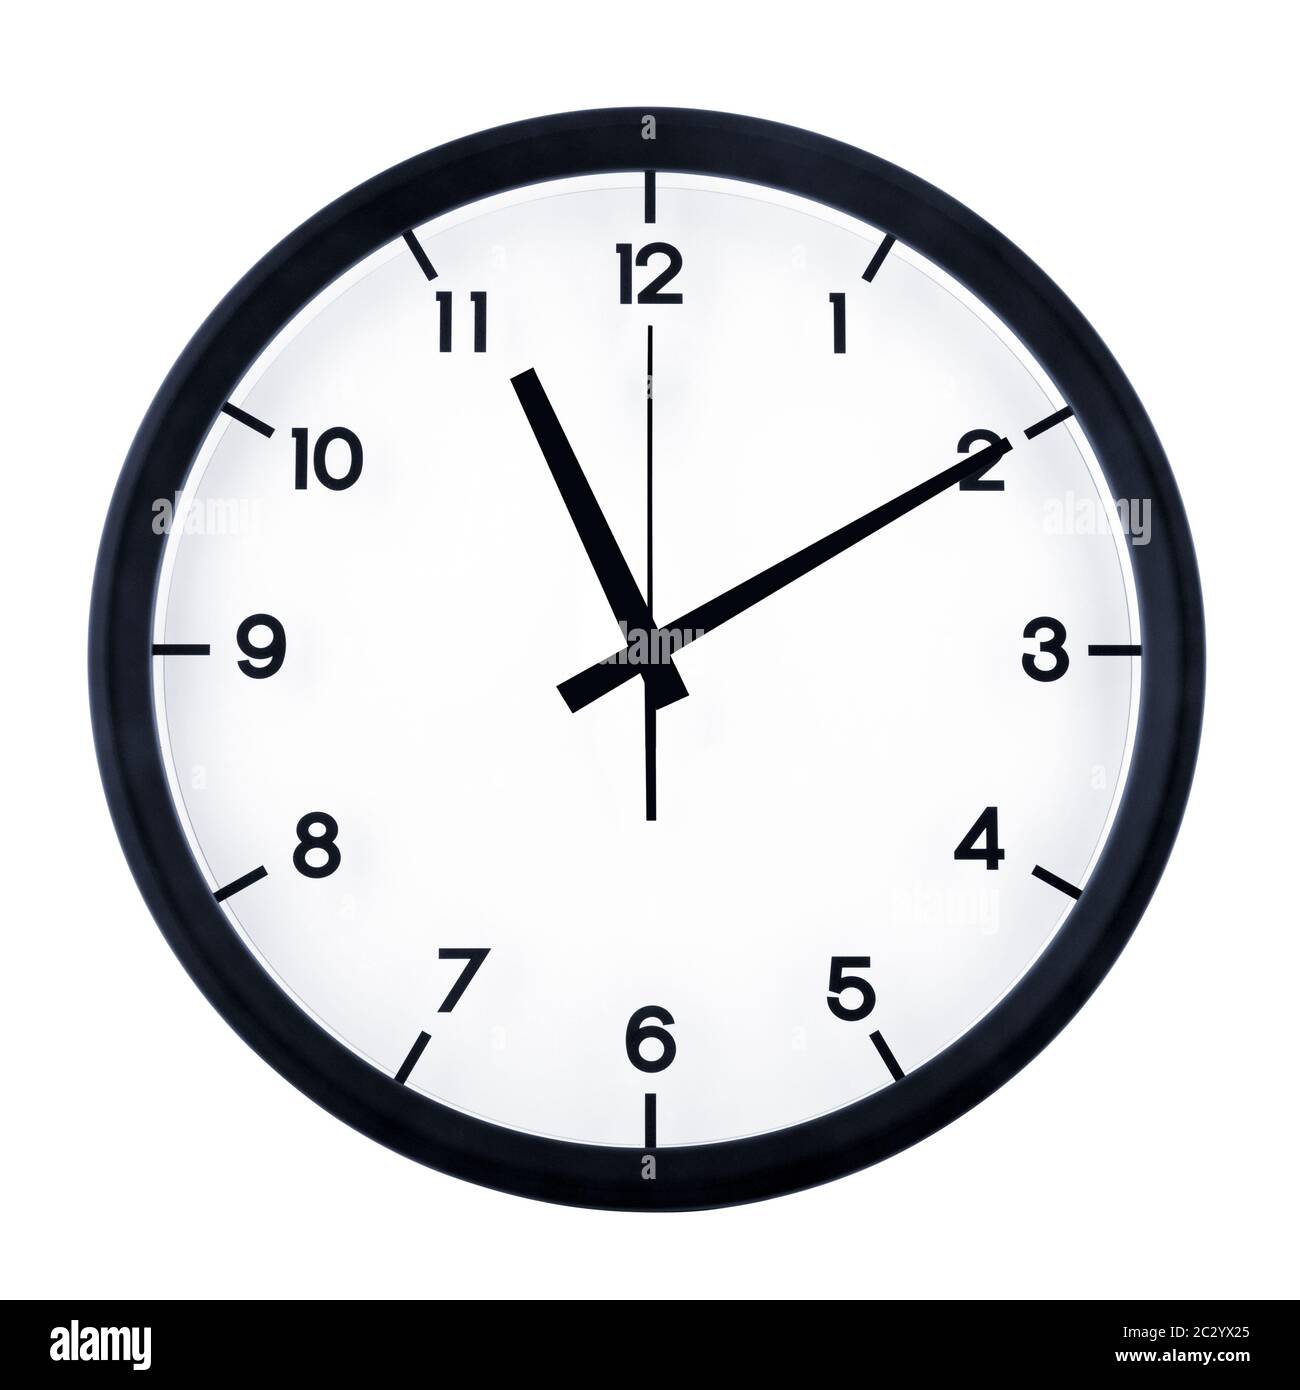 Classic analog clock pointing at eleven ten, isolated on white background  Stock Photo - Alamy